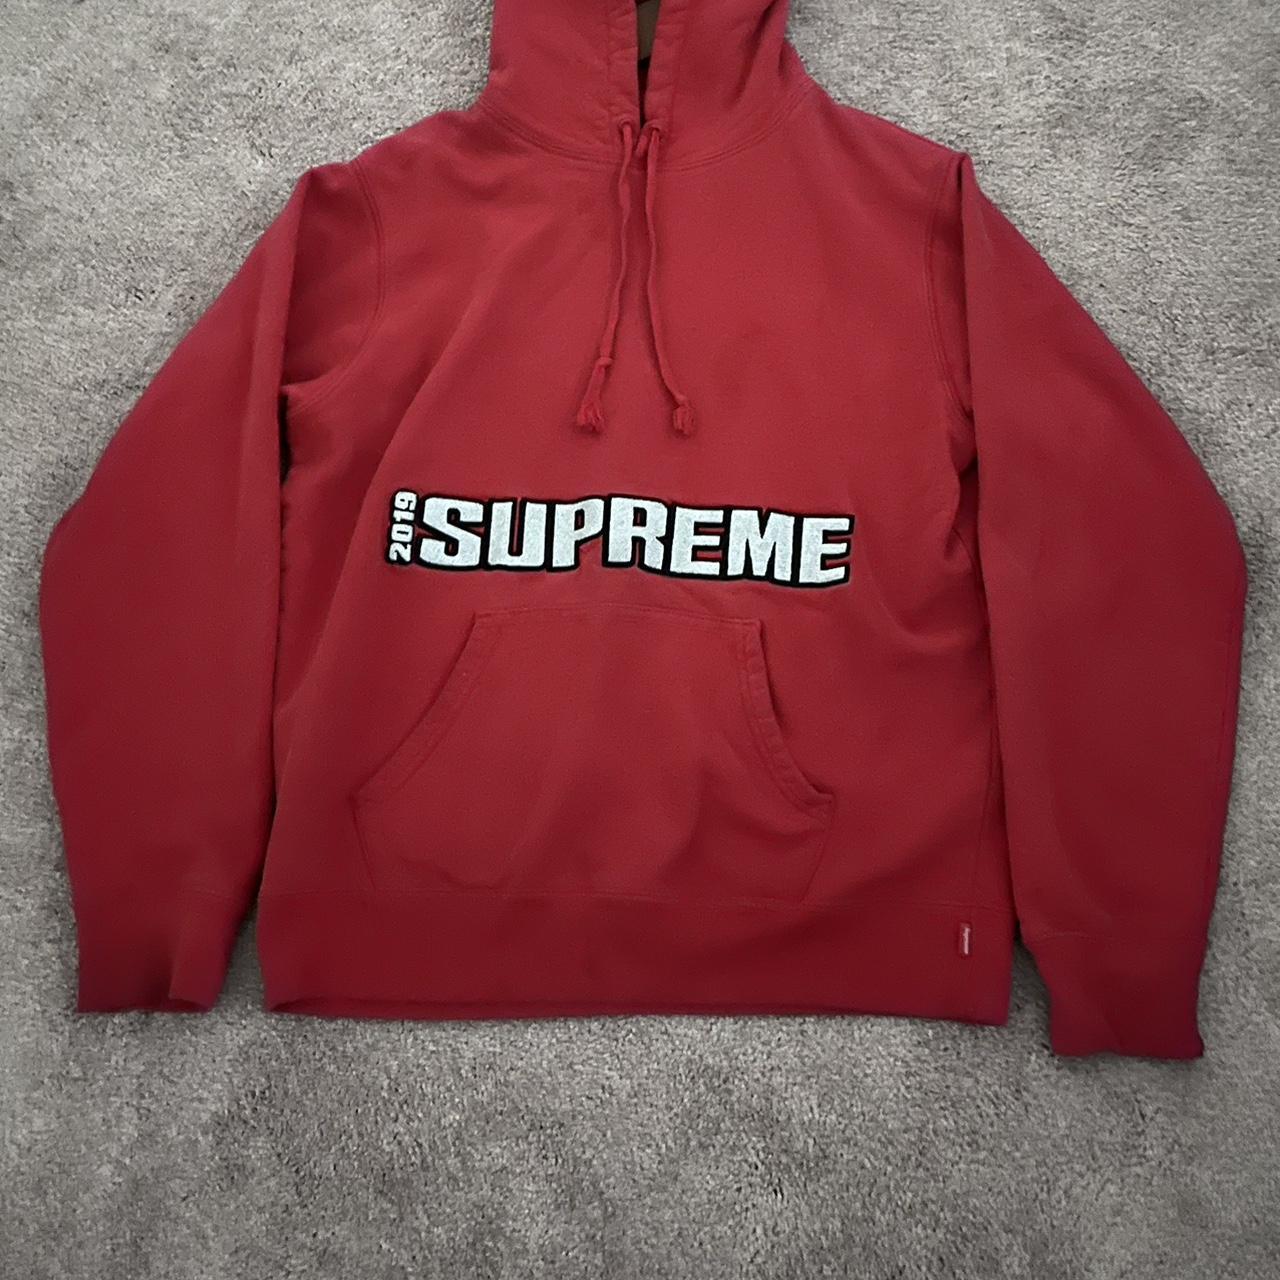 Supreme Blockbuster hoodie - red, Size S, Worn but...